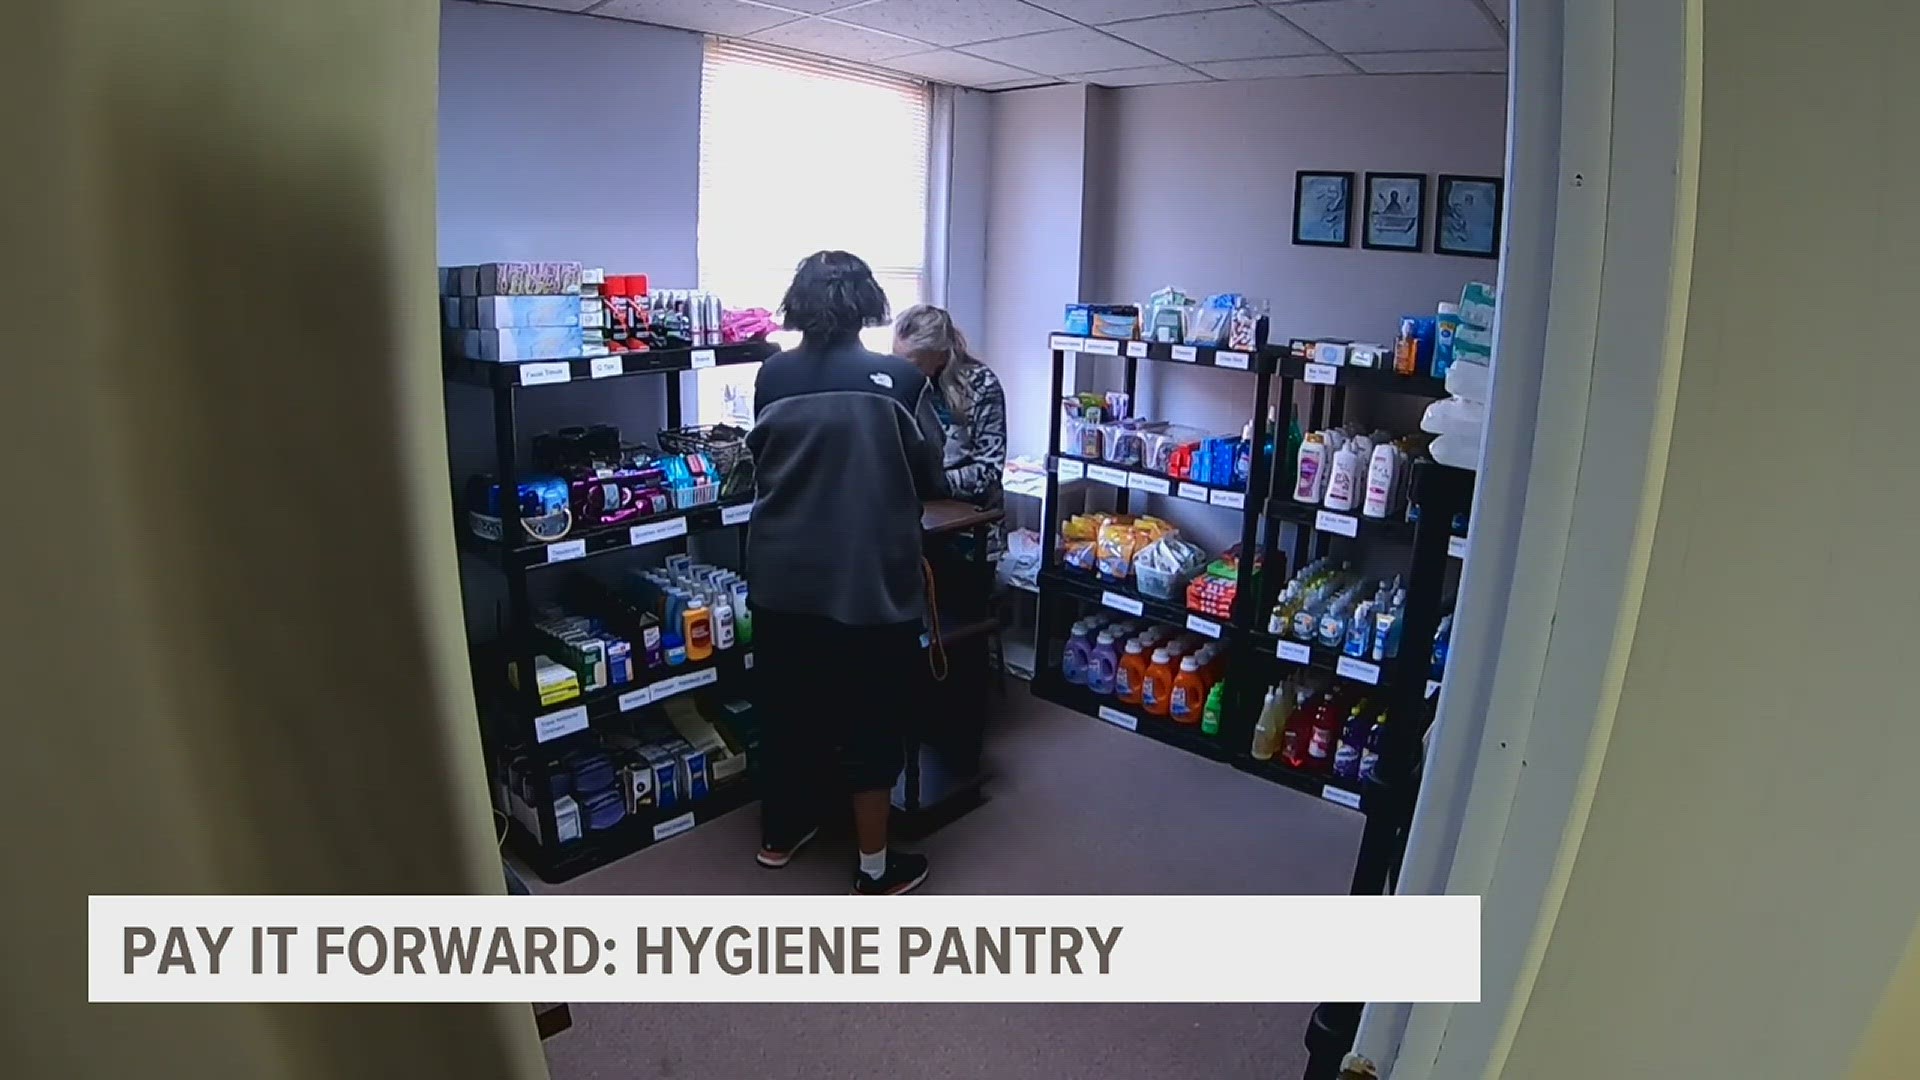 The Community Hygiene Pantry in Galesburg helps serve those who are in need of toiletries and household cleaning items.